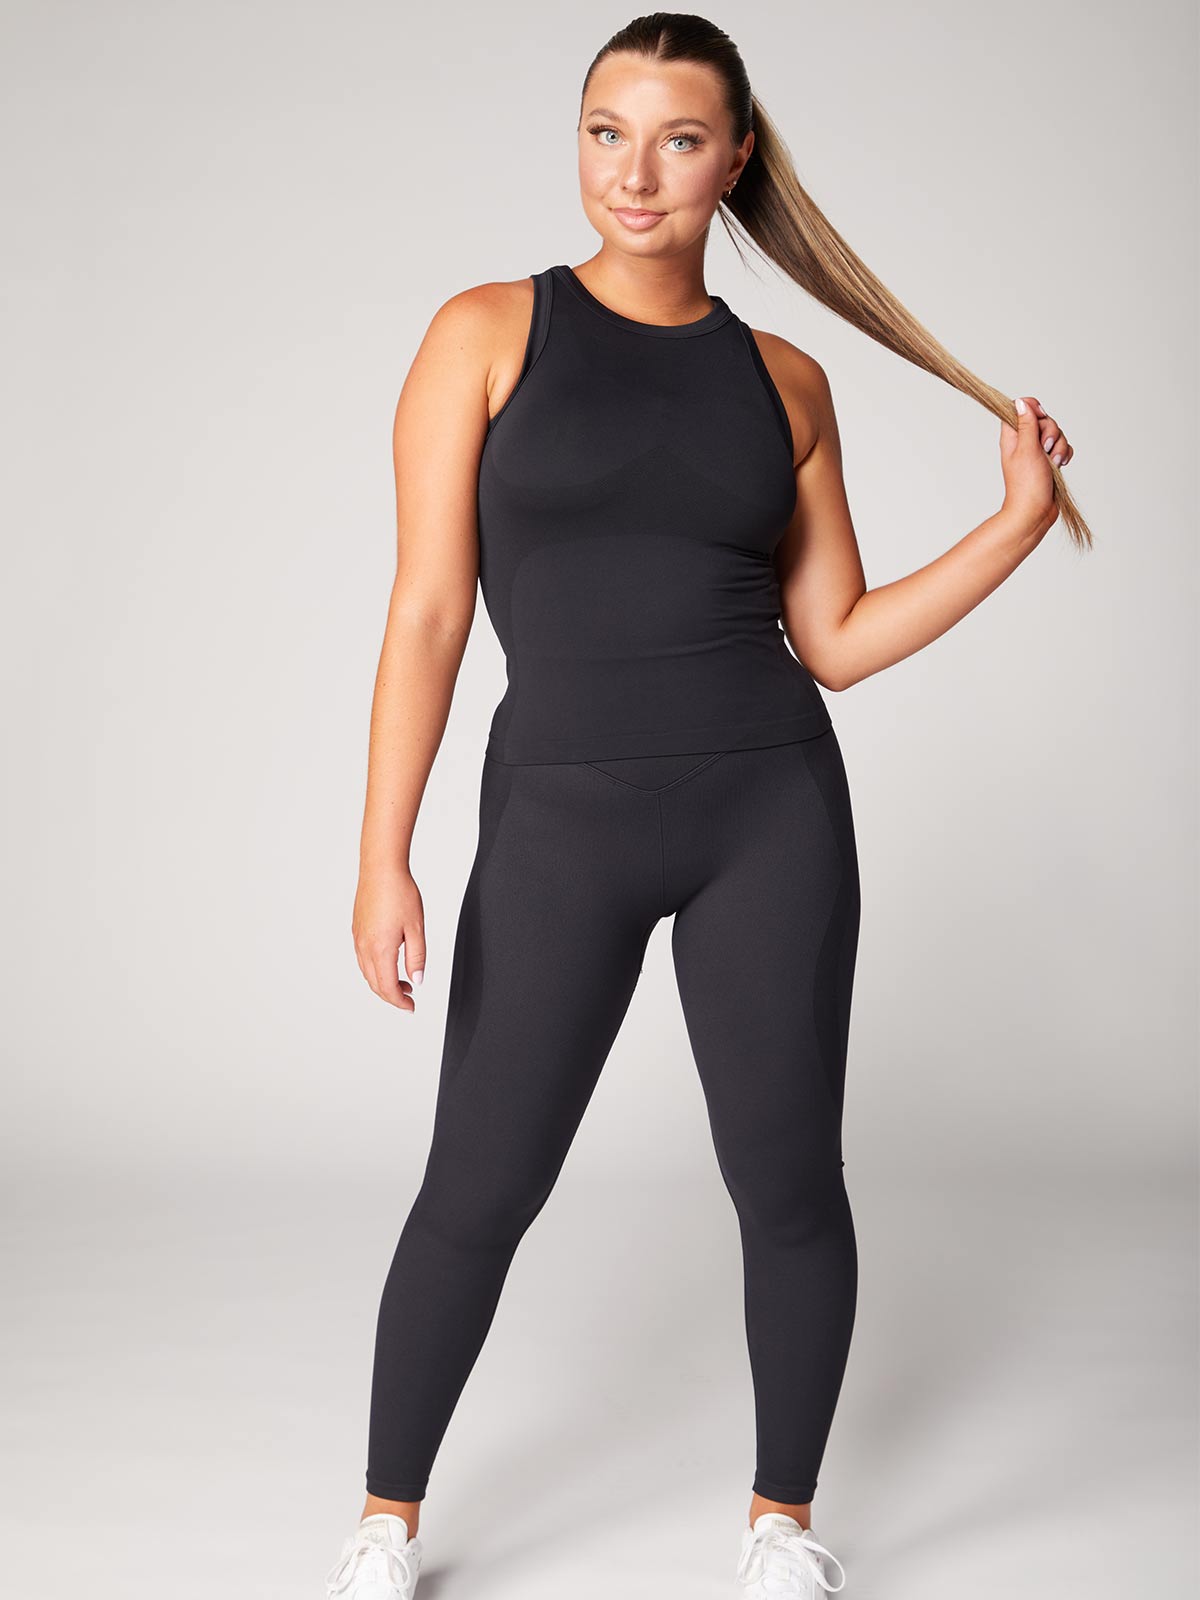 Achieve a flawless fit with our Seamless Tank Top